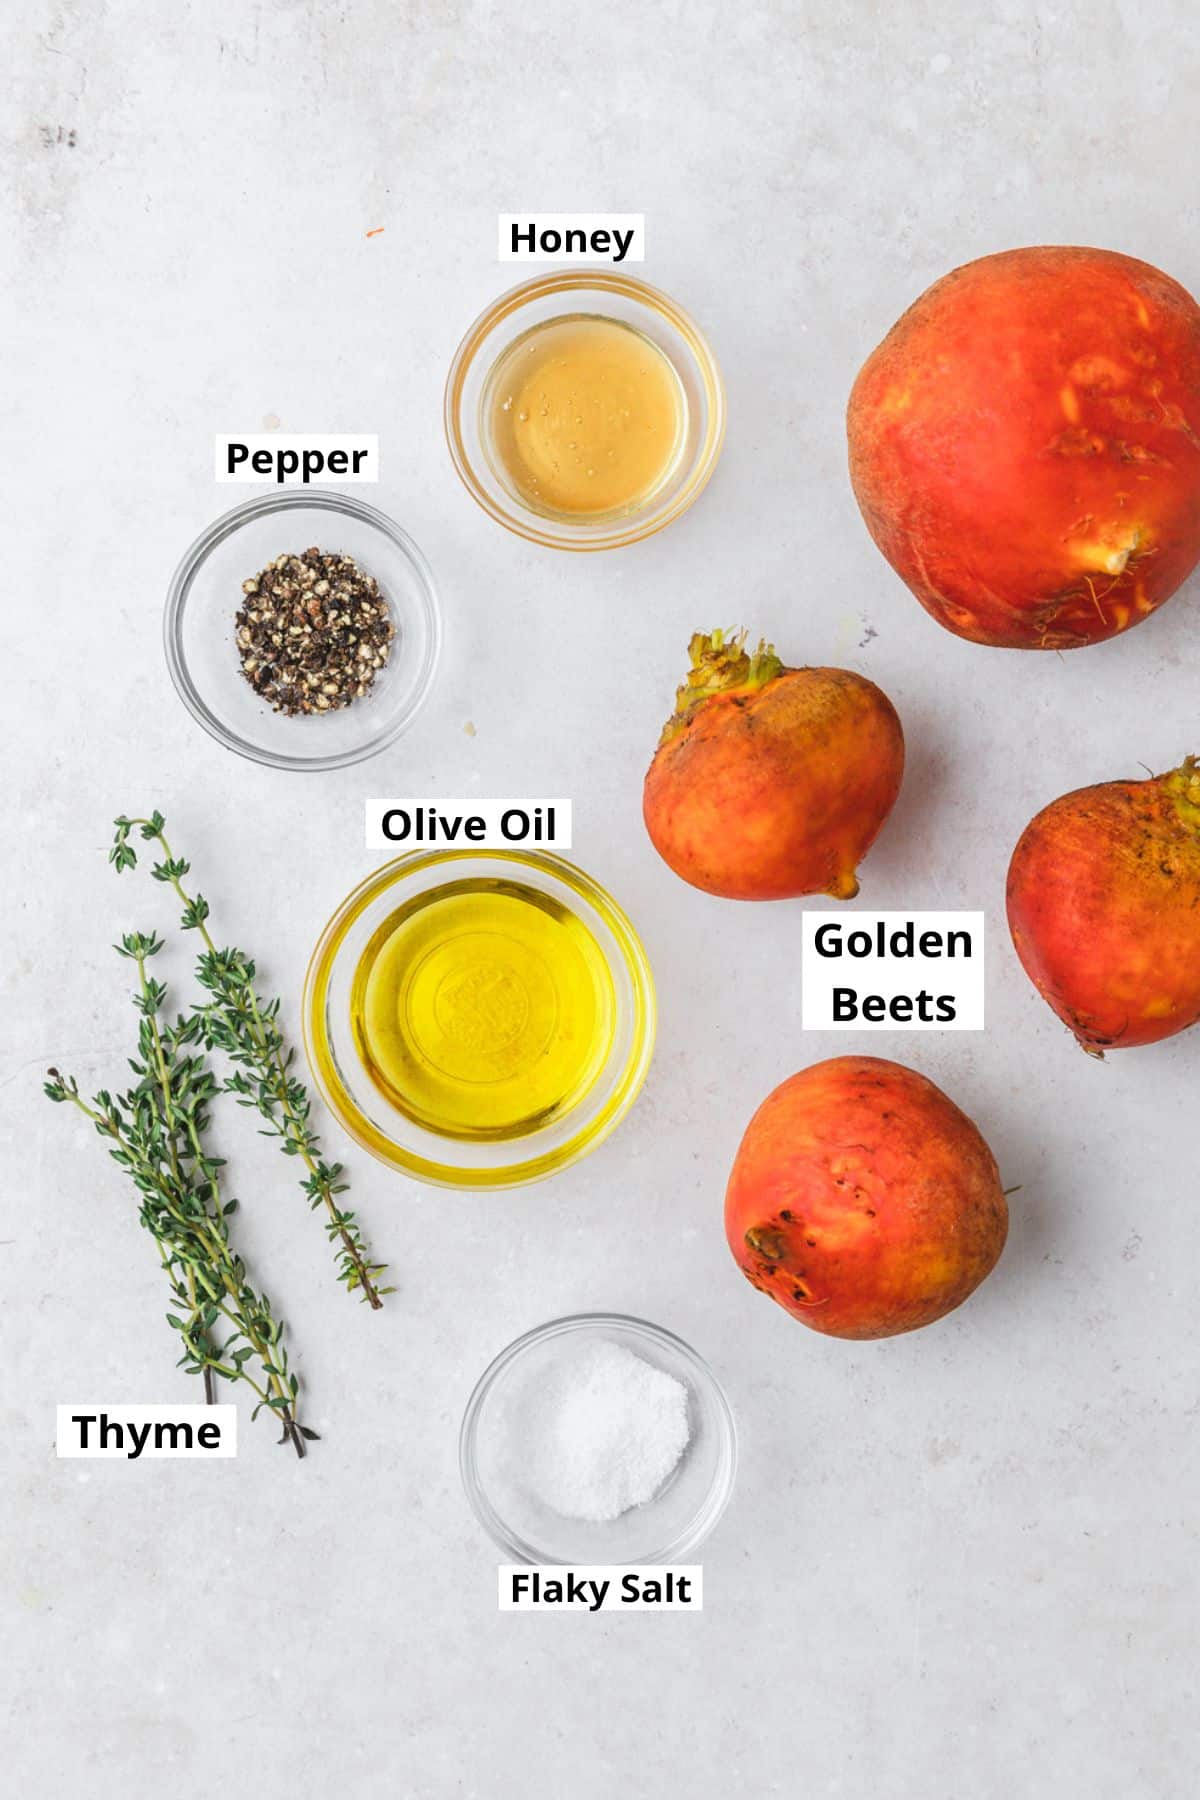 labeled ingredients for roasted golden beets.